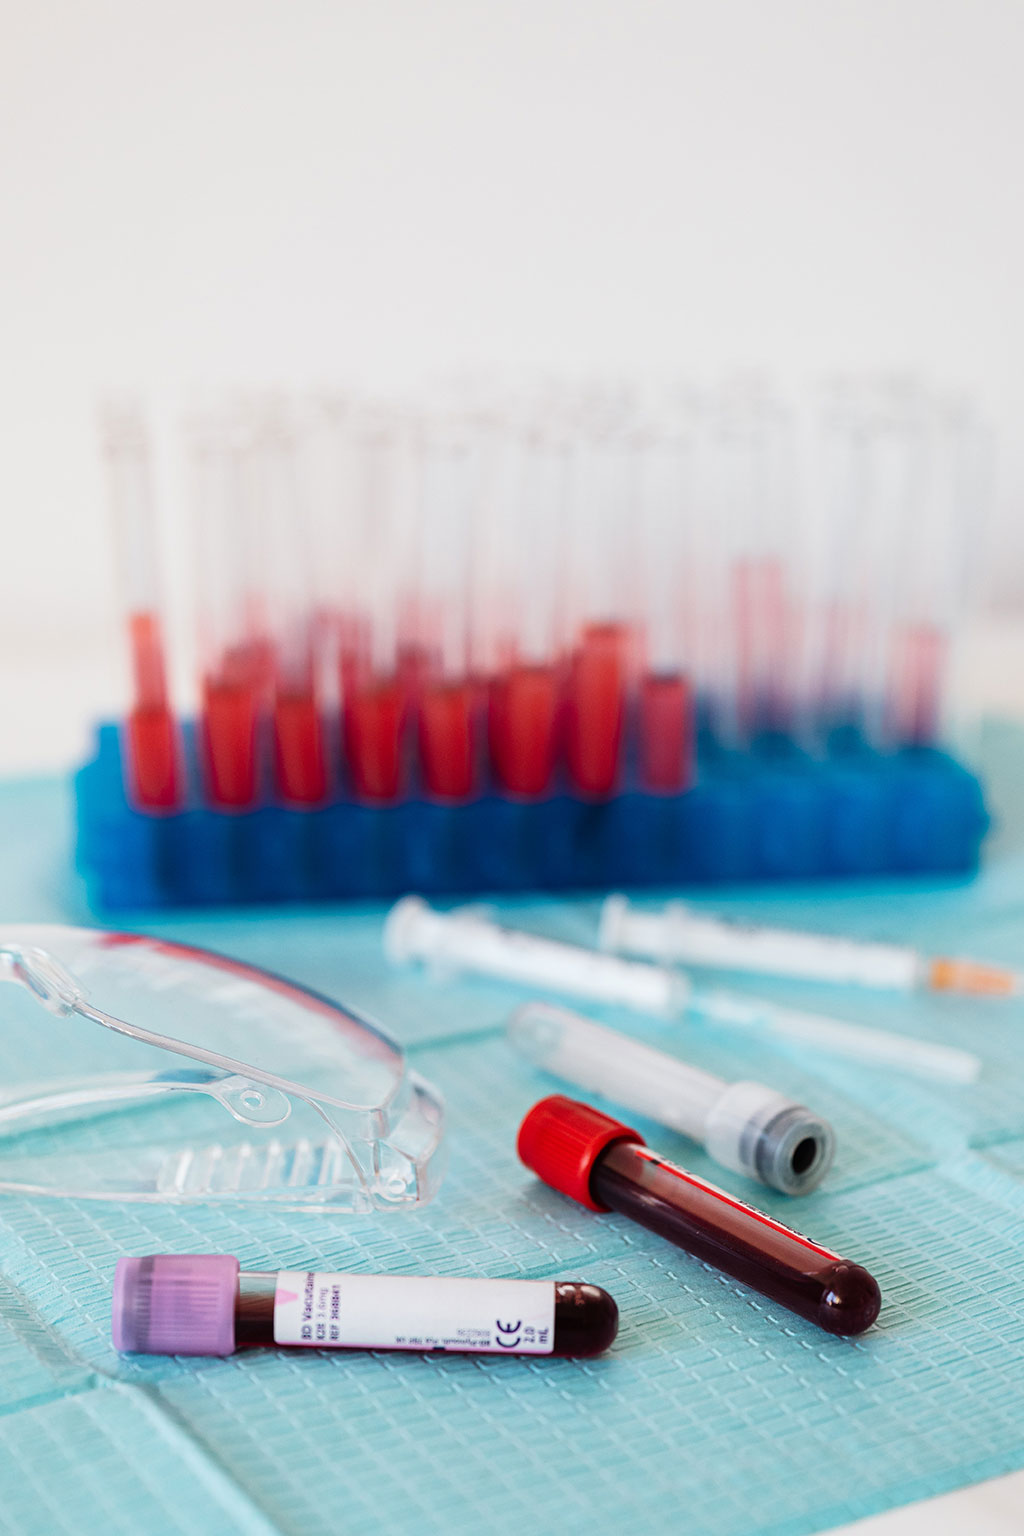 Image: The global hematology diagnostics market is expected to surpass USD 5.5 billion by 2026 (Photo courtesy of Pexels)